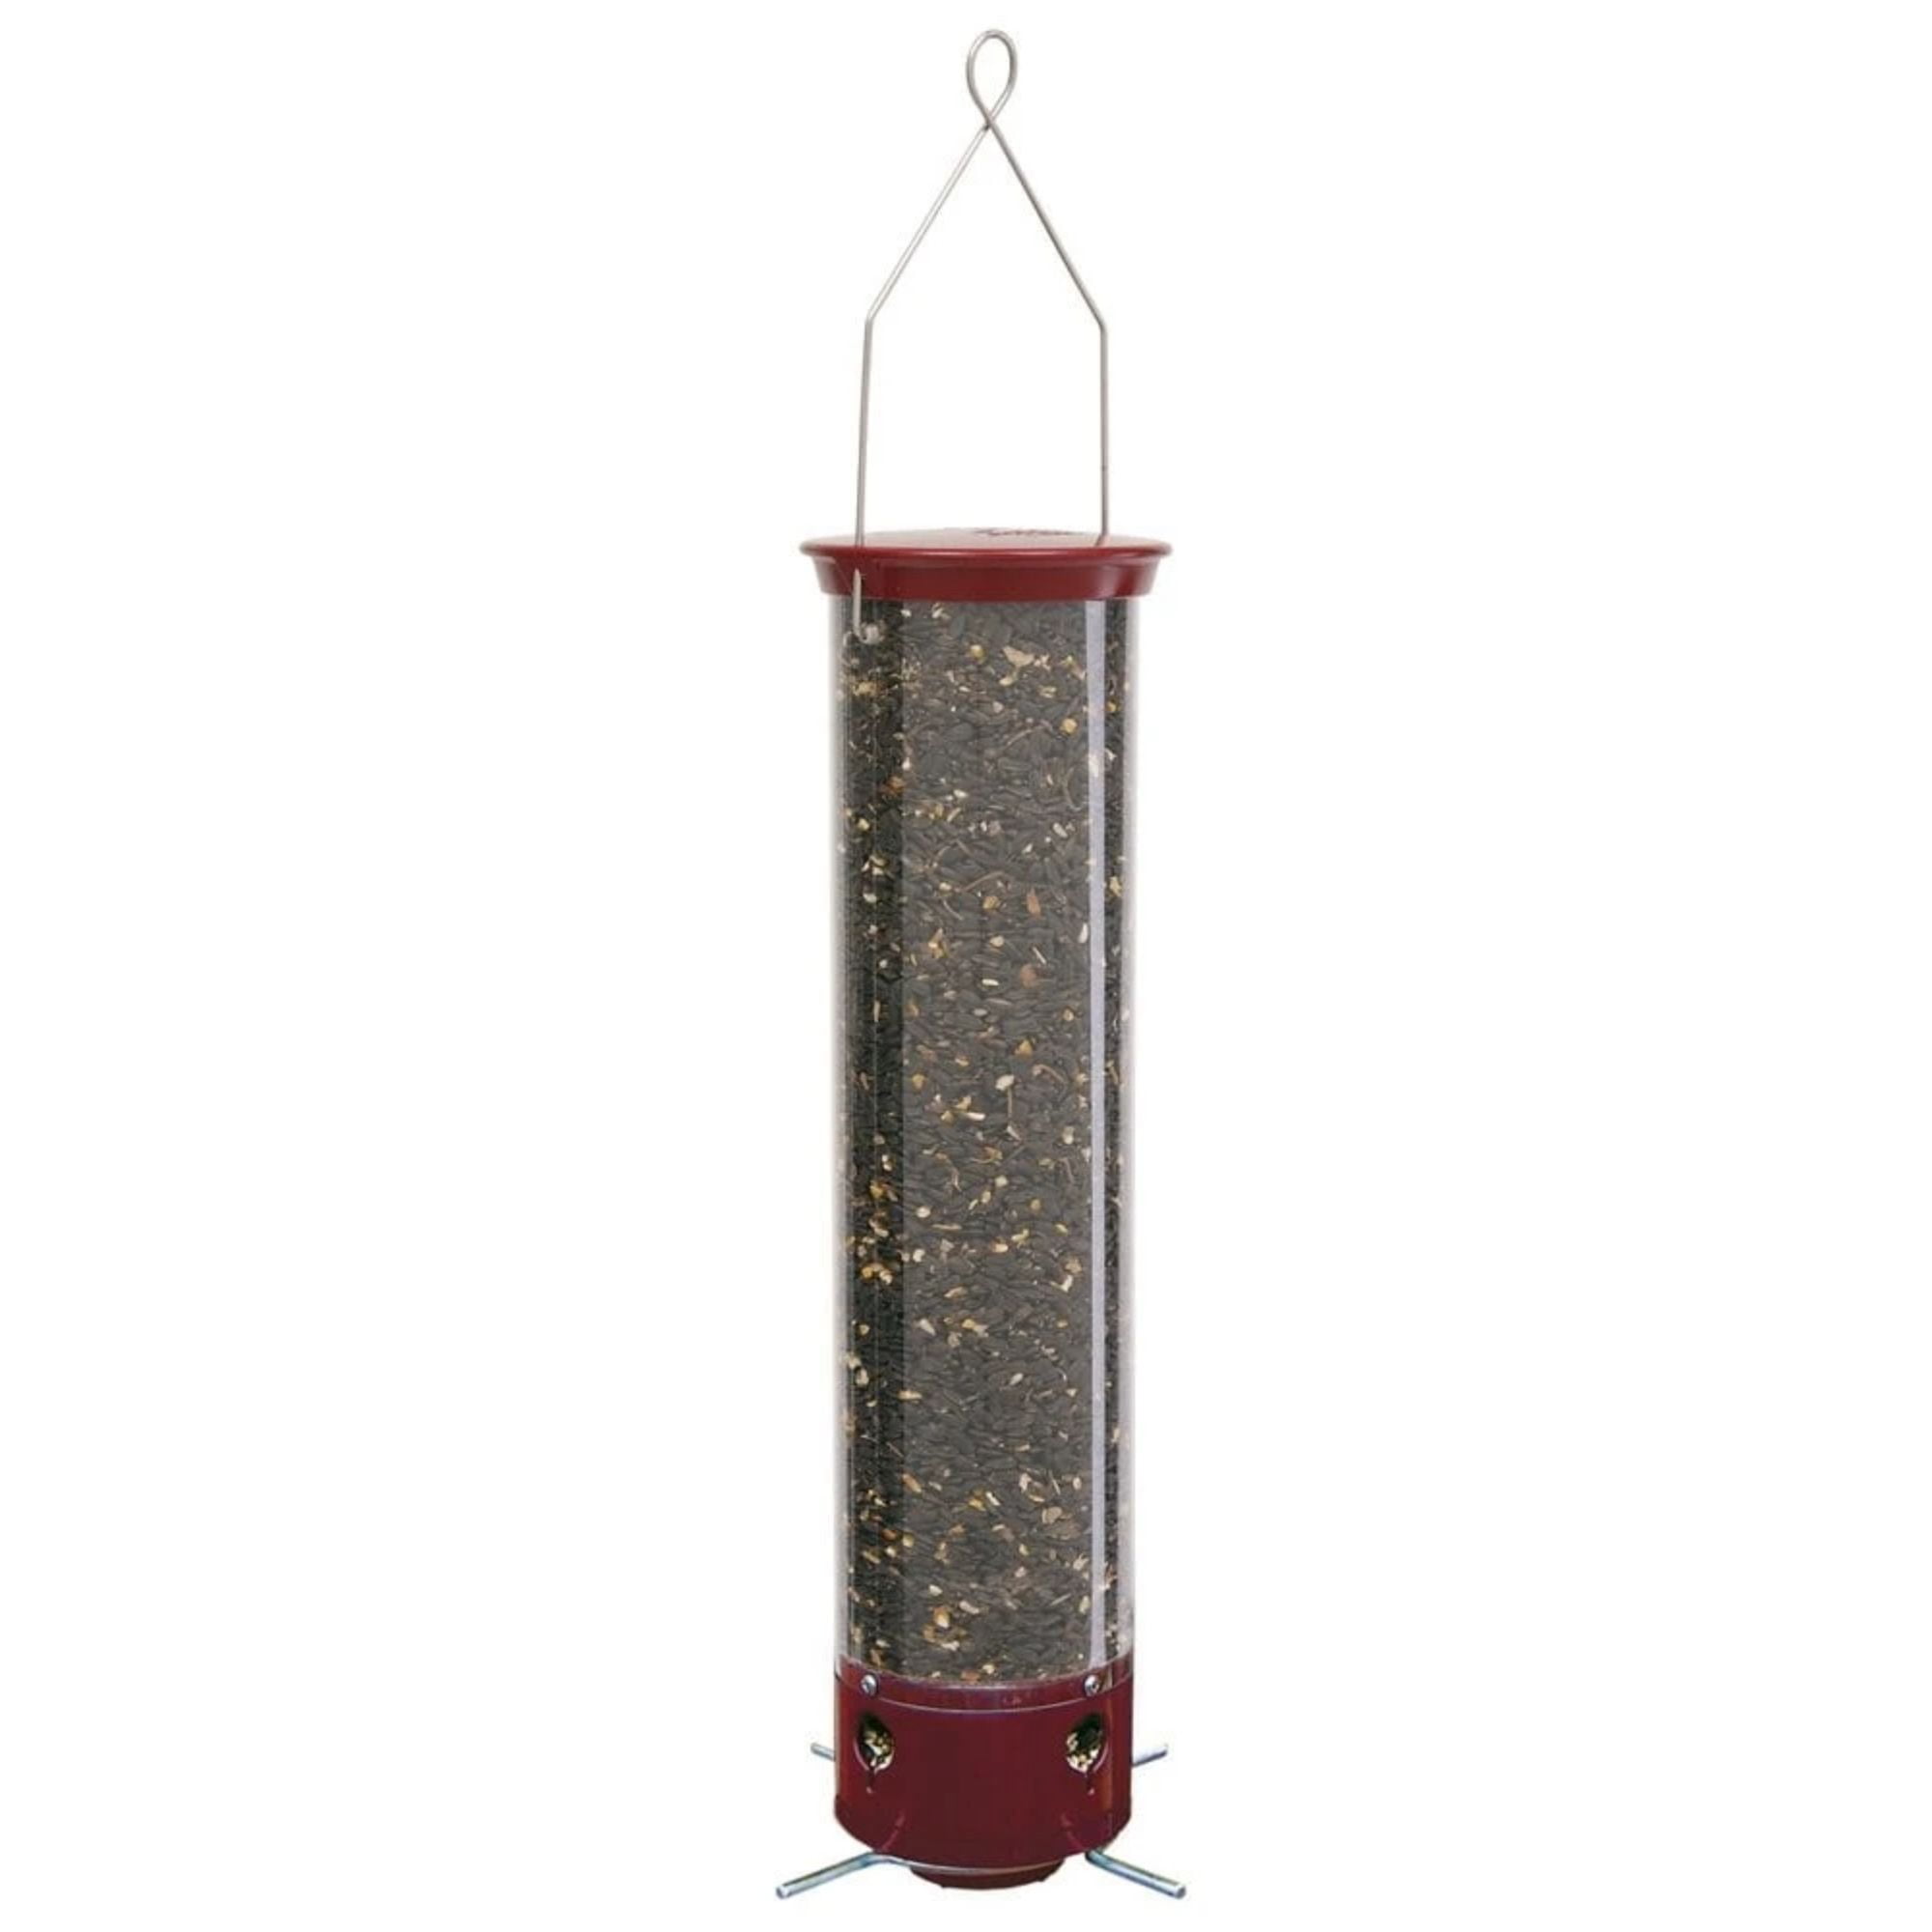 Droll Yankees YCPD90 Dipper Squirrel Proof Bird Feeder for sale online 